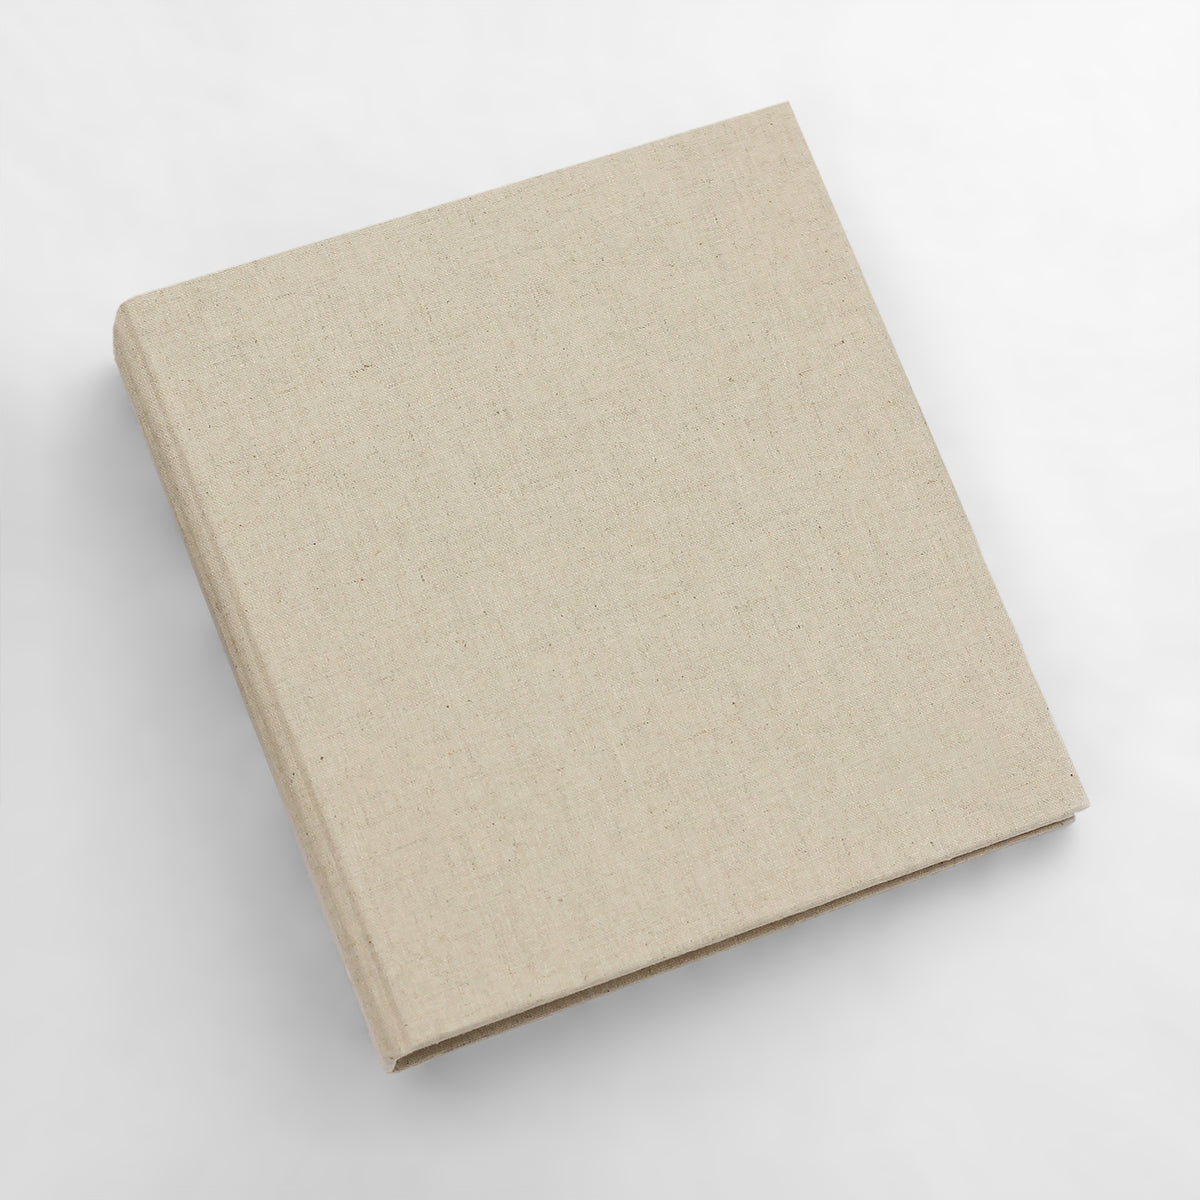 Medium Photo Binder | for 4 x 6 photos | with Natural Linen Cover